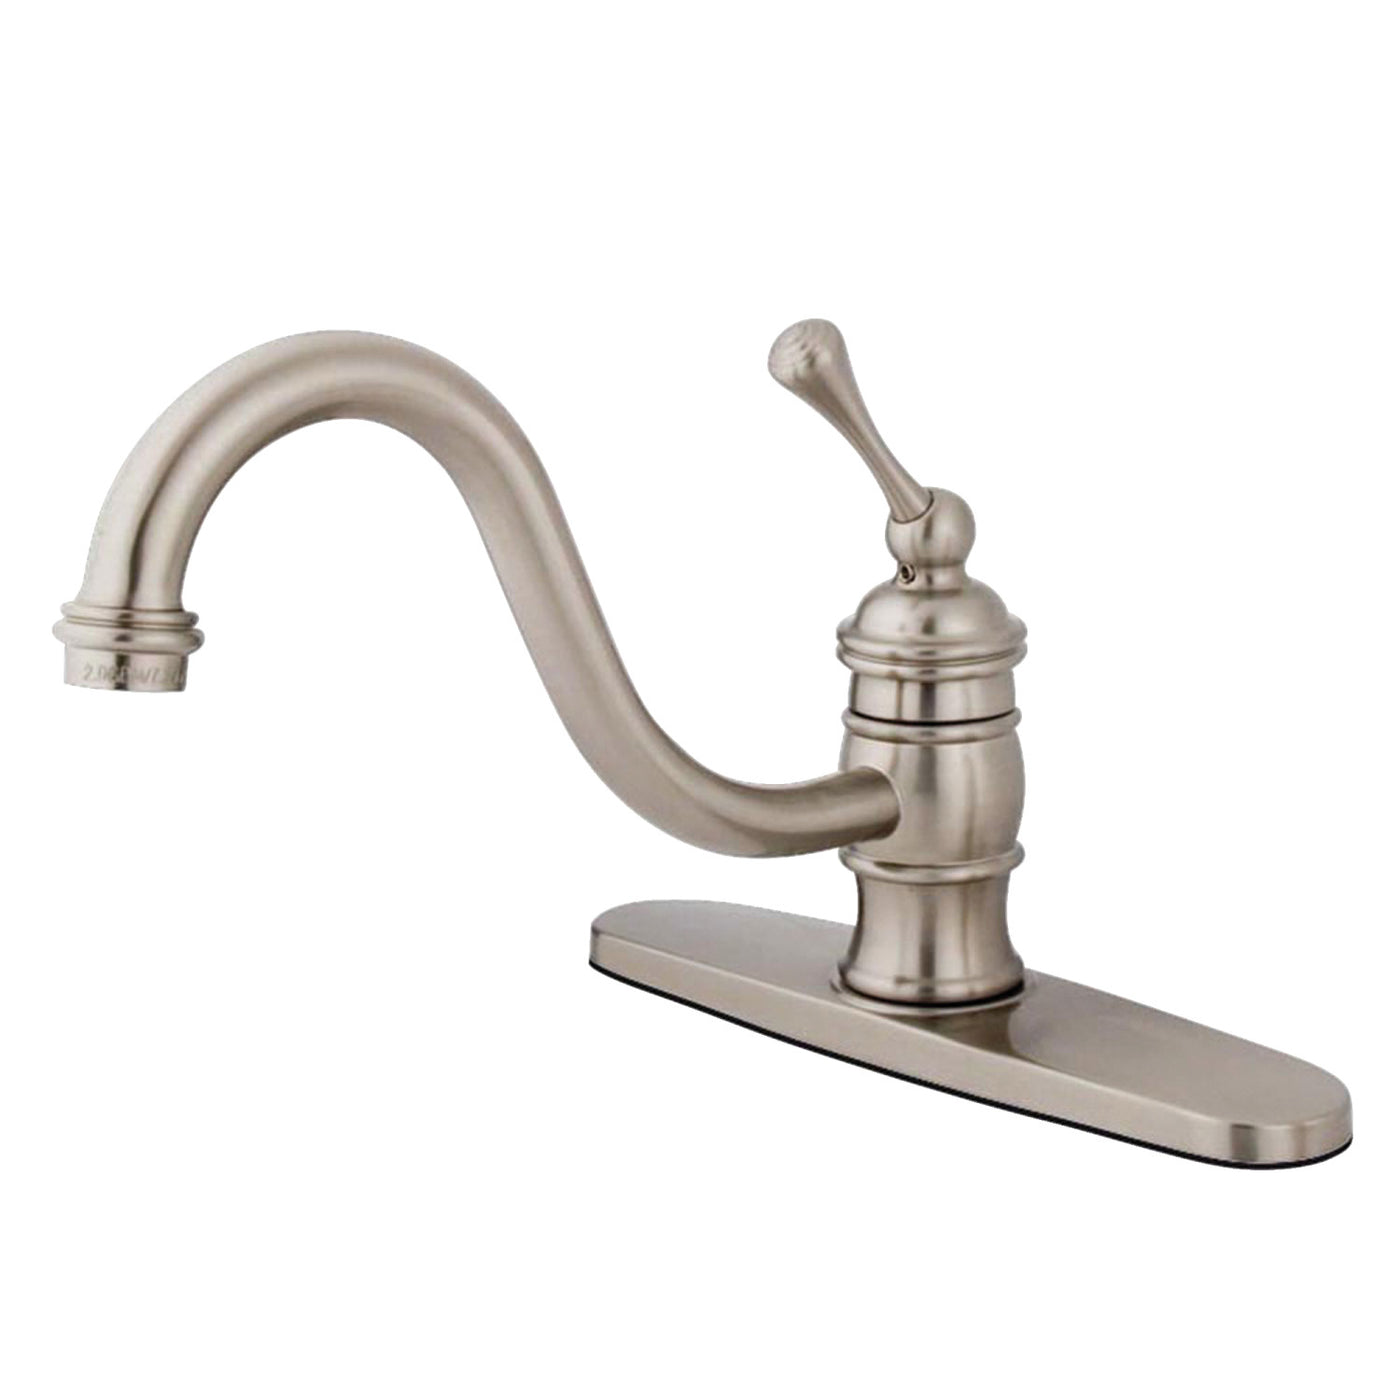 Elements of Design EB3578BLLS Single-Handle Kitchen Faucet, Brushed Nickel